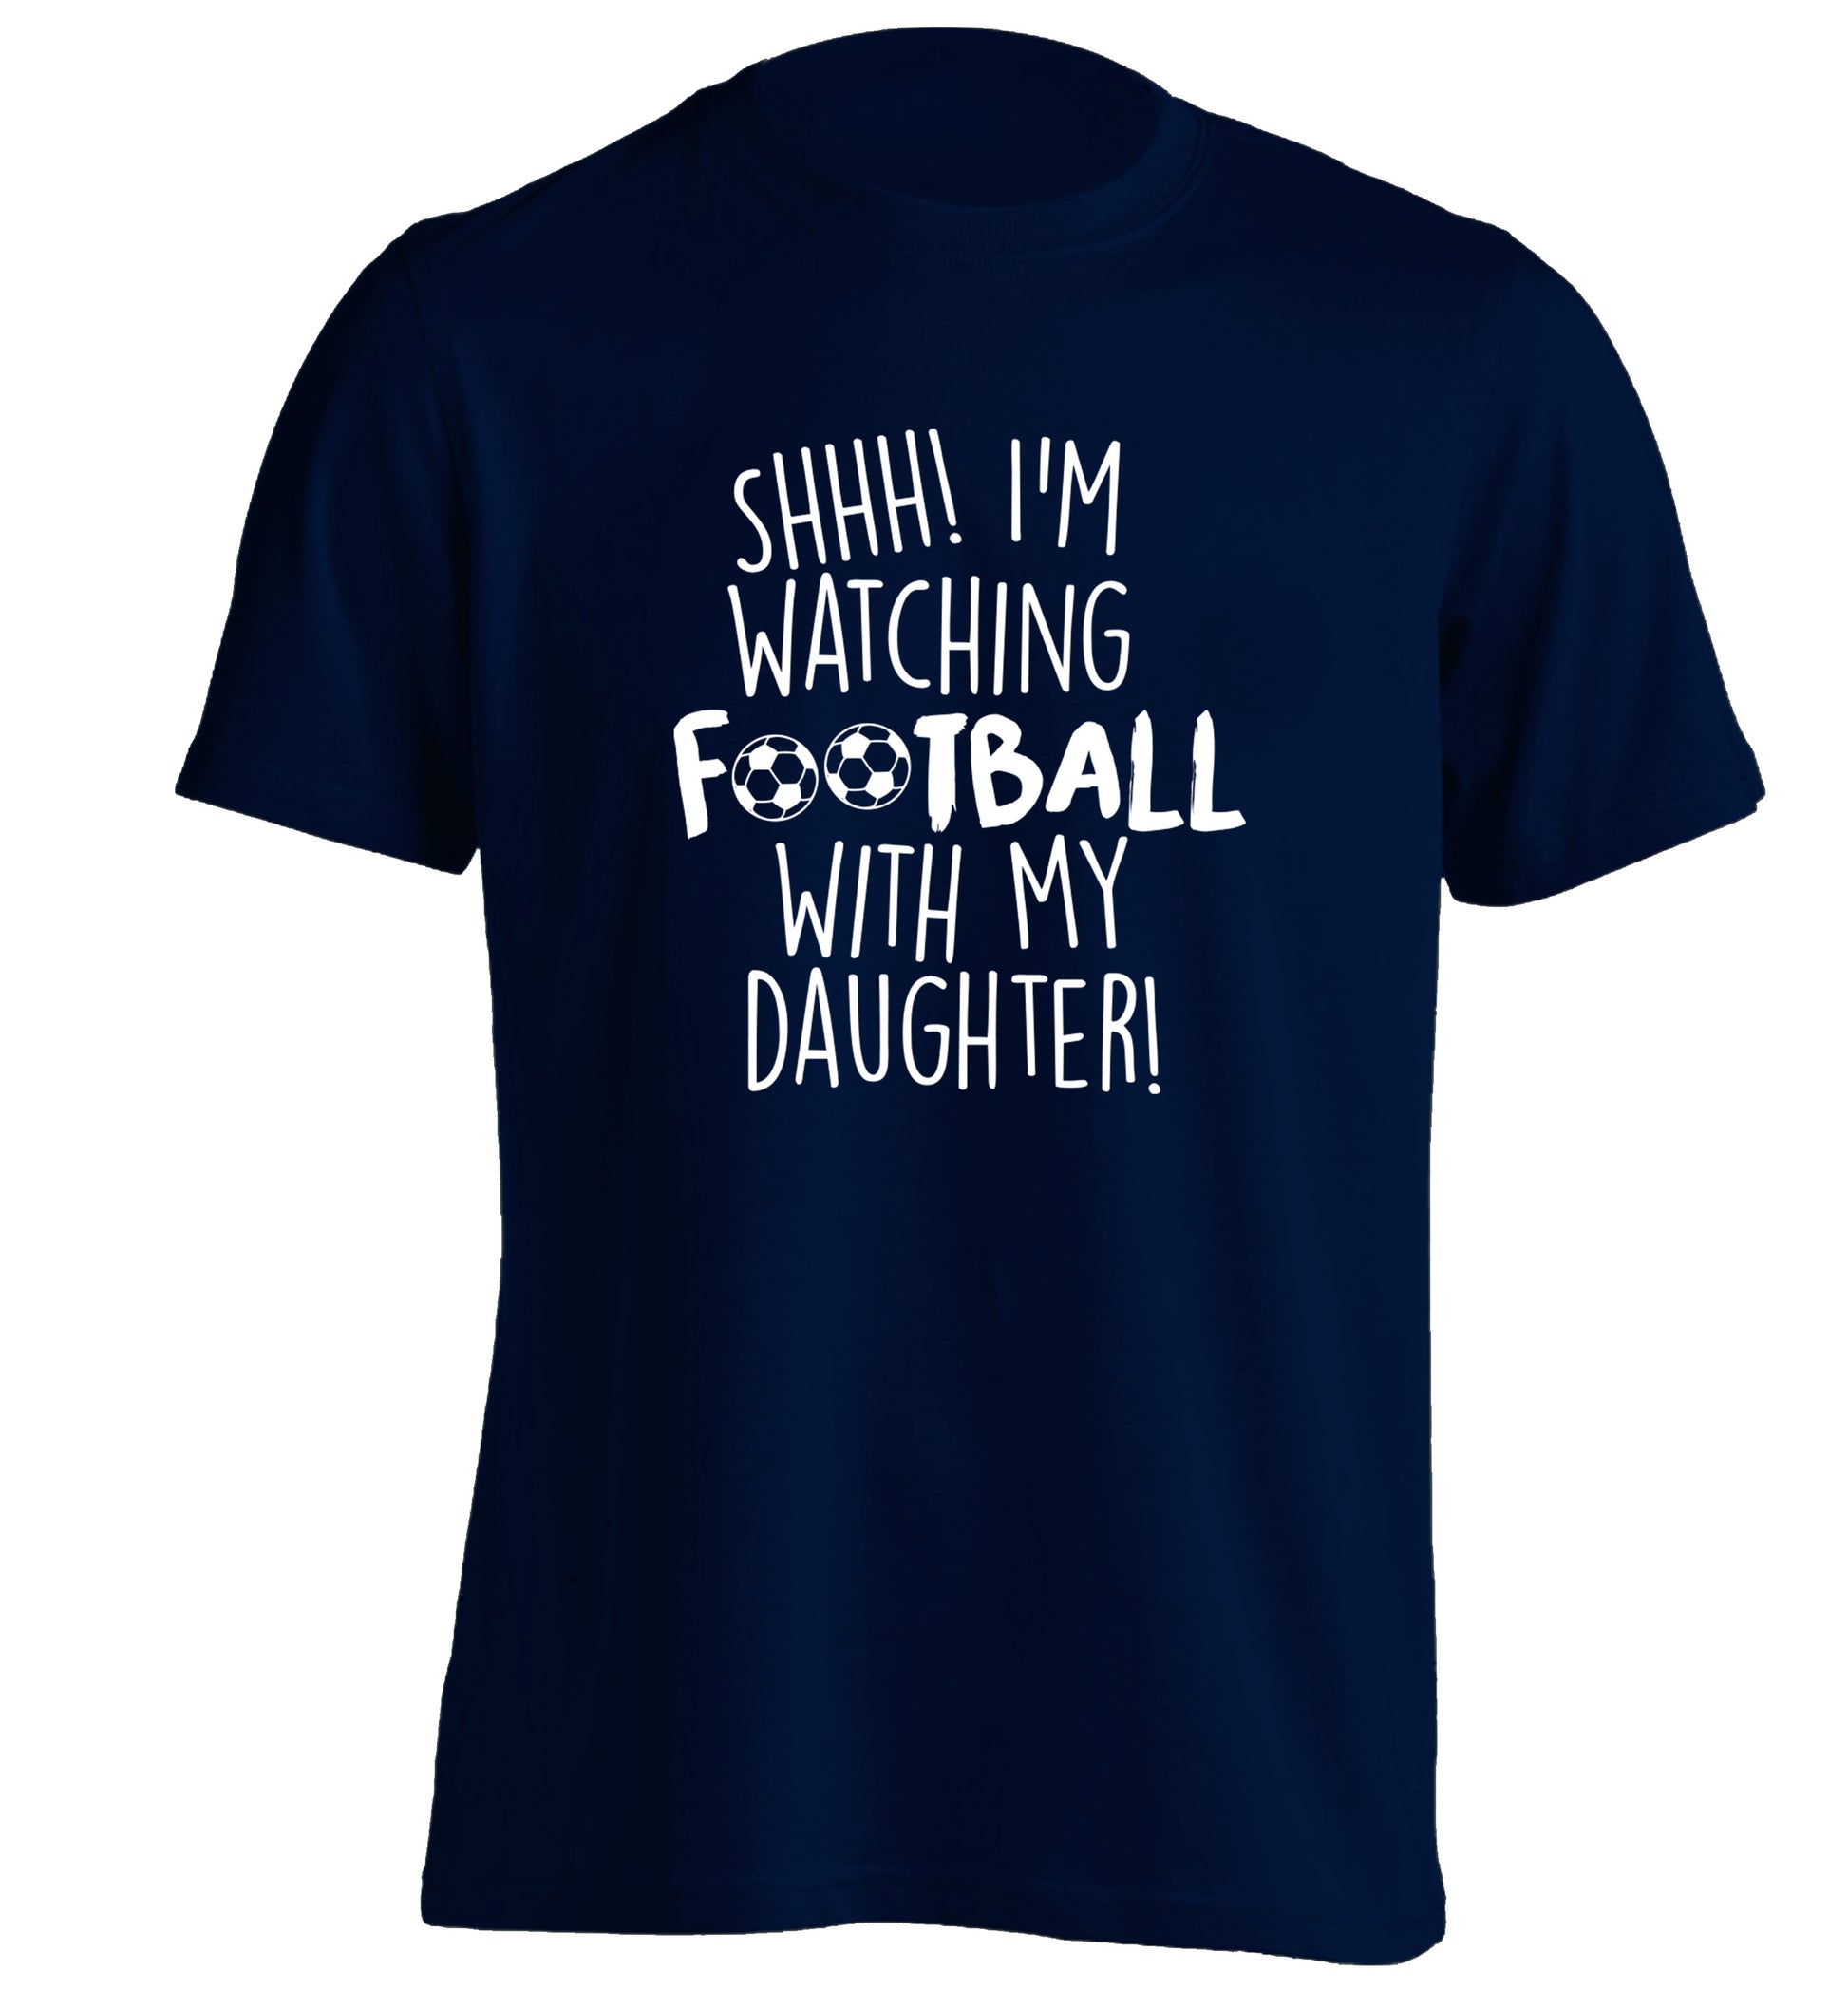 Shhh I'm watching football with my daughter adults unisexnavy Tshirt 2XL